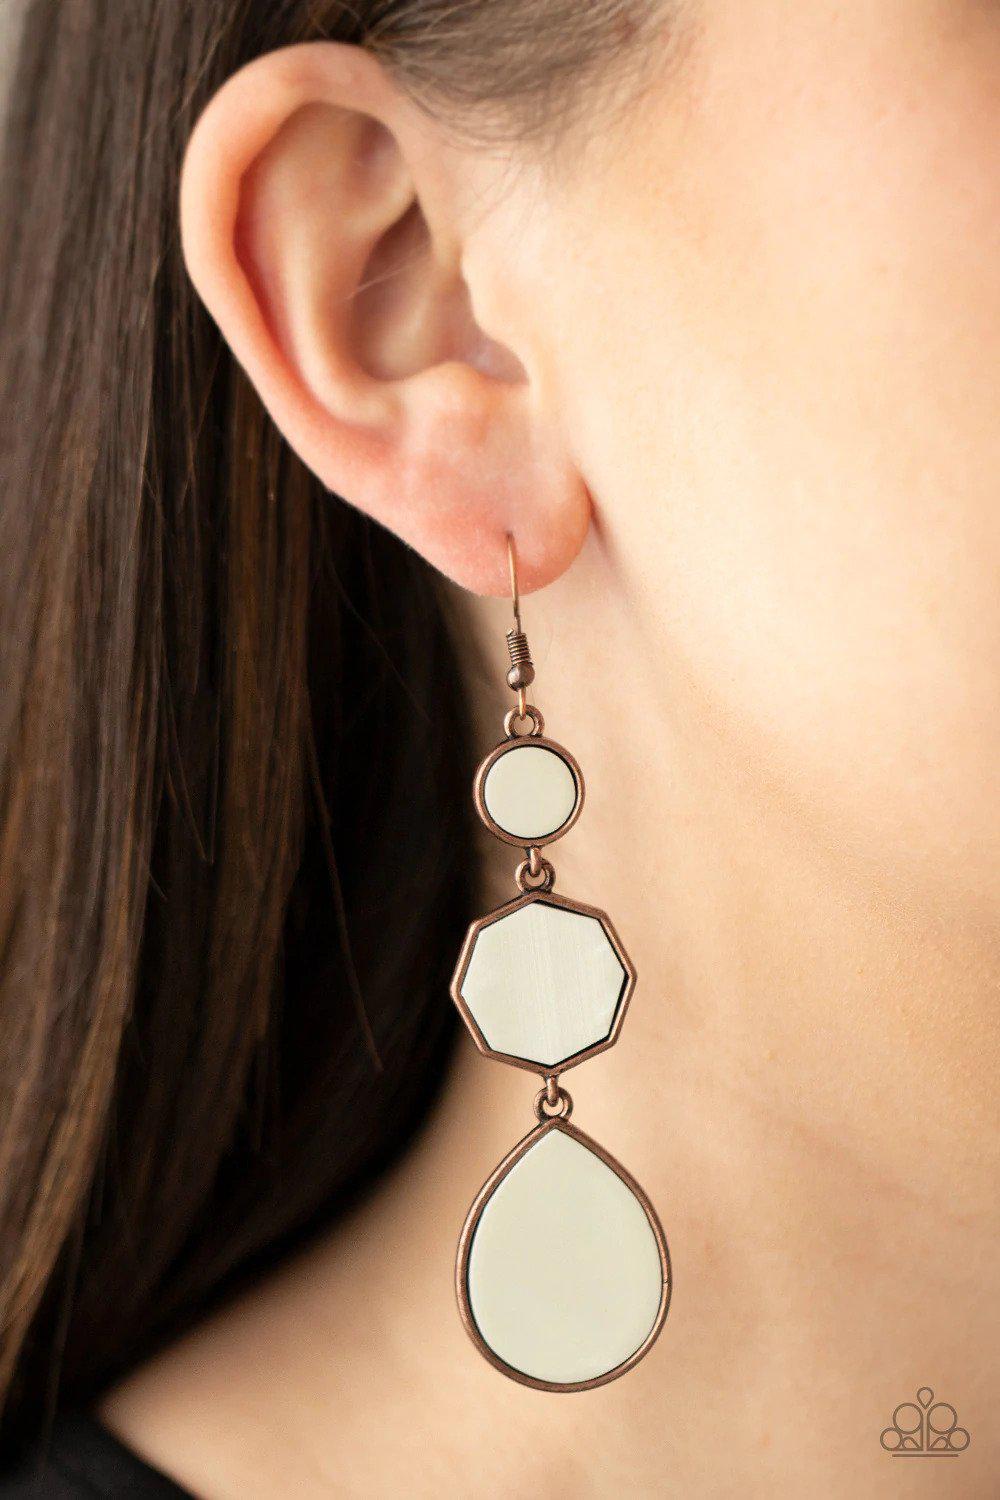 Progressively Posh Copper Earrings - Paparazzi Accessories- on model - CarasShop.com - $5 Jewelry by Cara Jewels